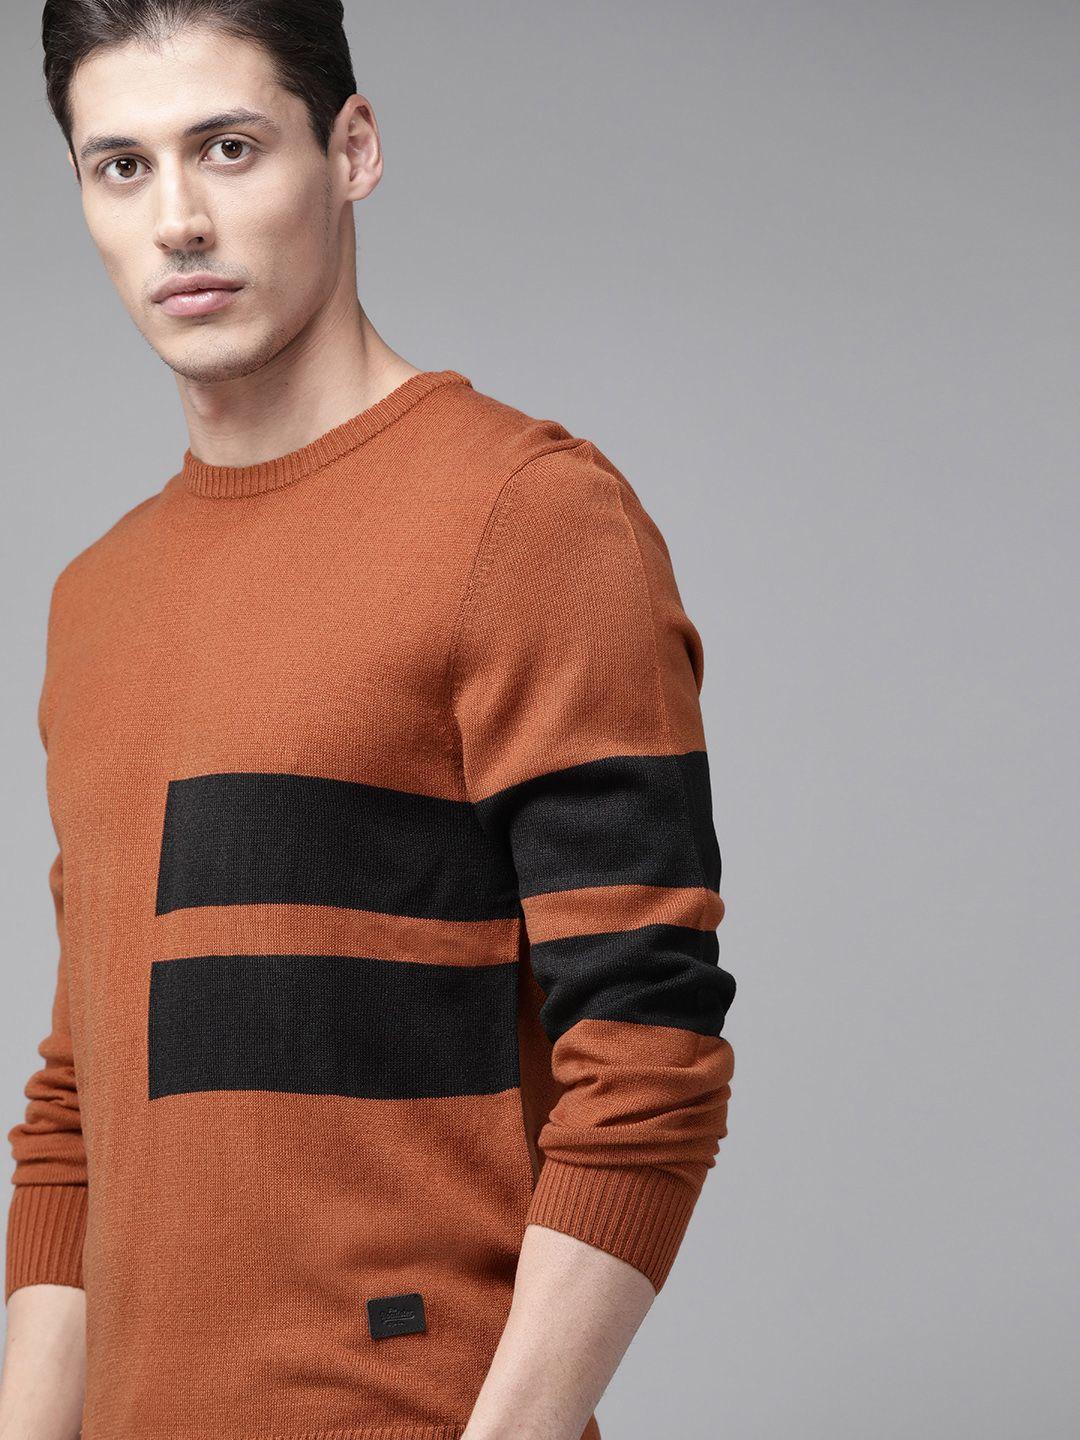 the roadster lifestyle co men brown & black striped pullover